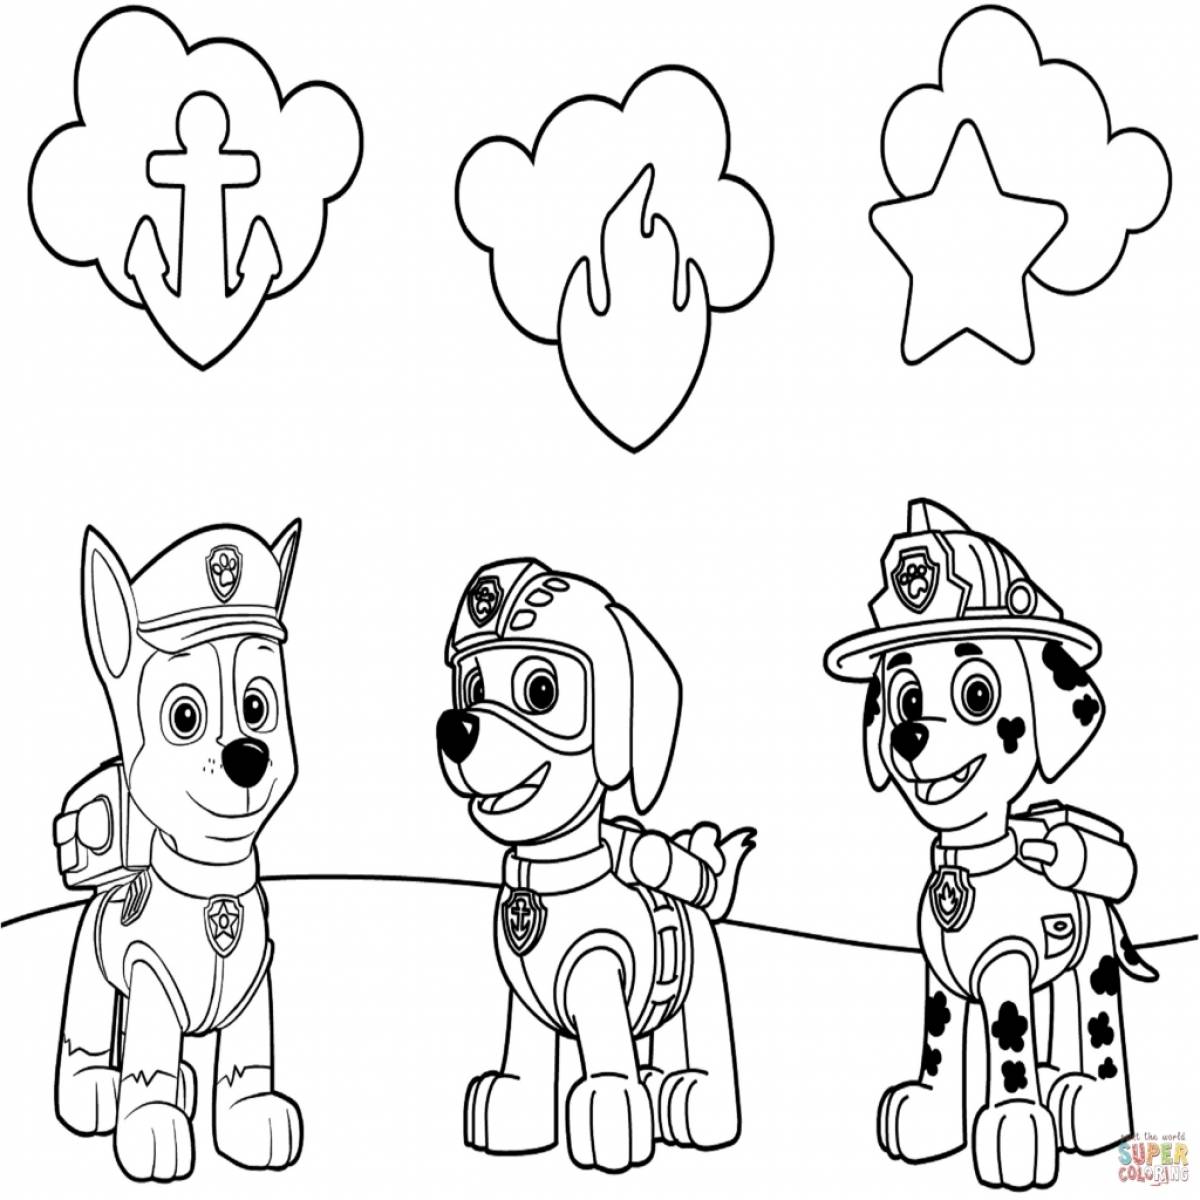 Coloring page shiny water paw patrol